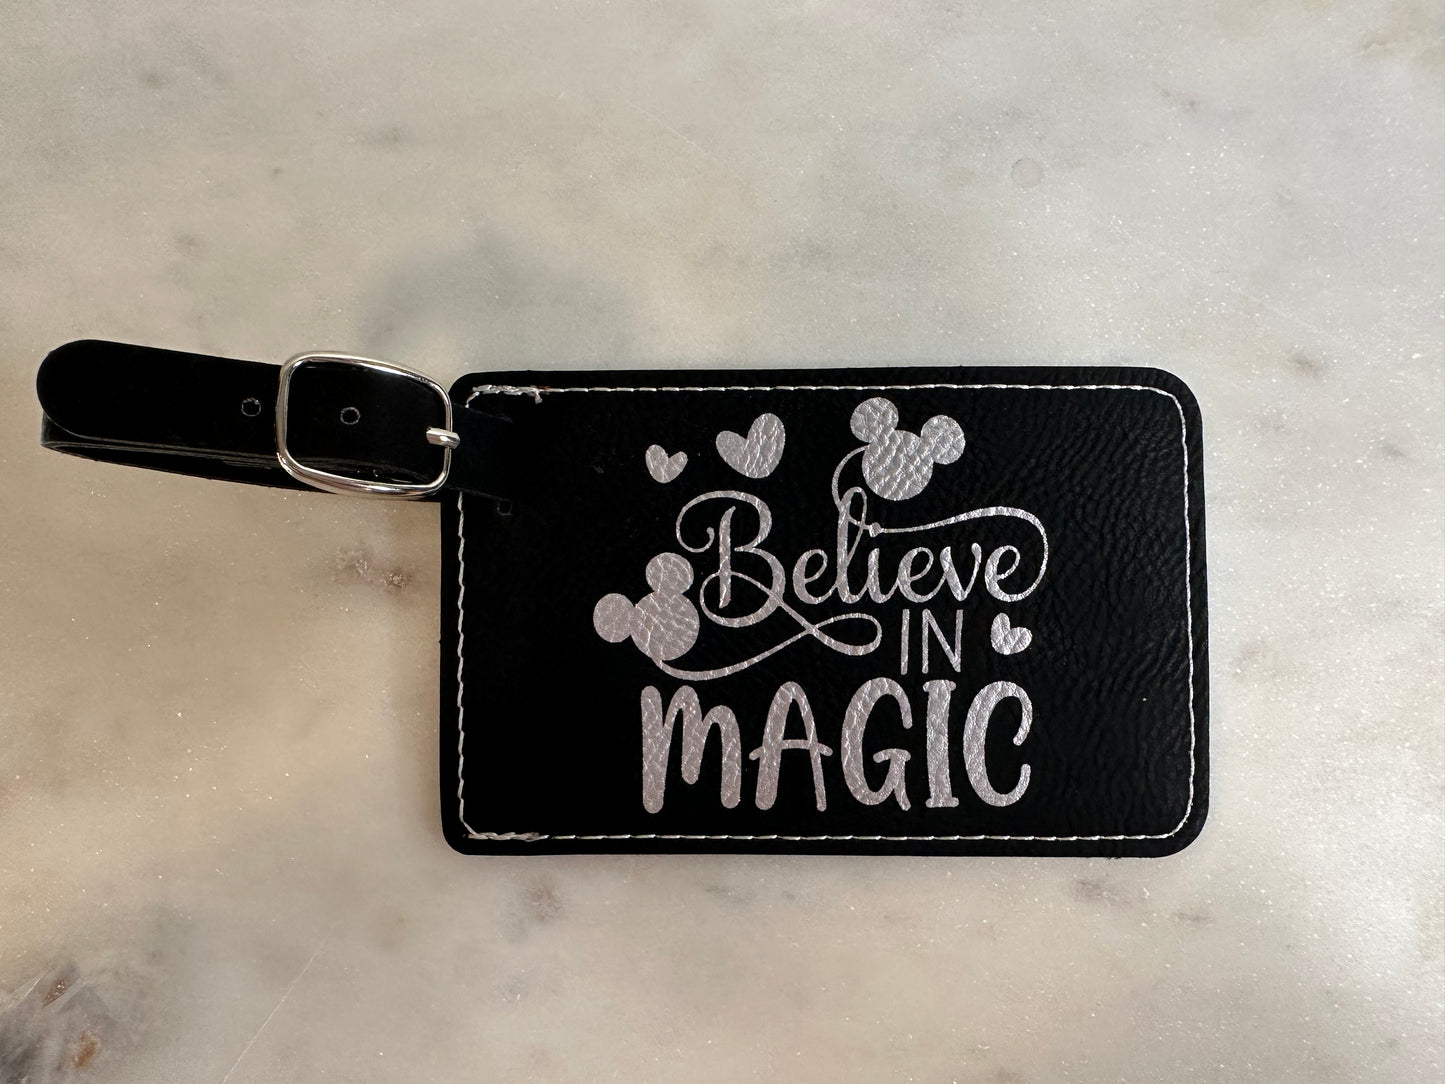 Believe in the magic luggage tag